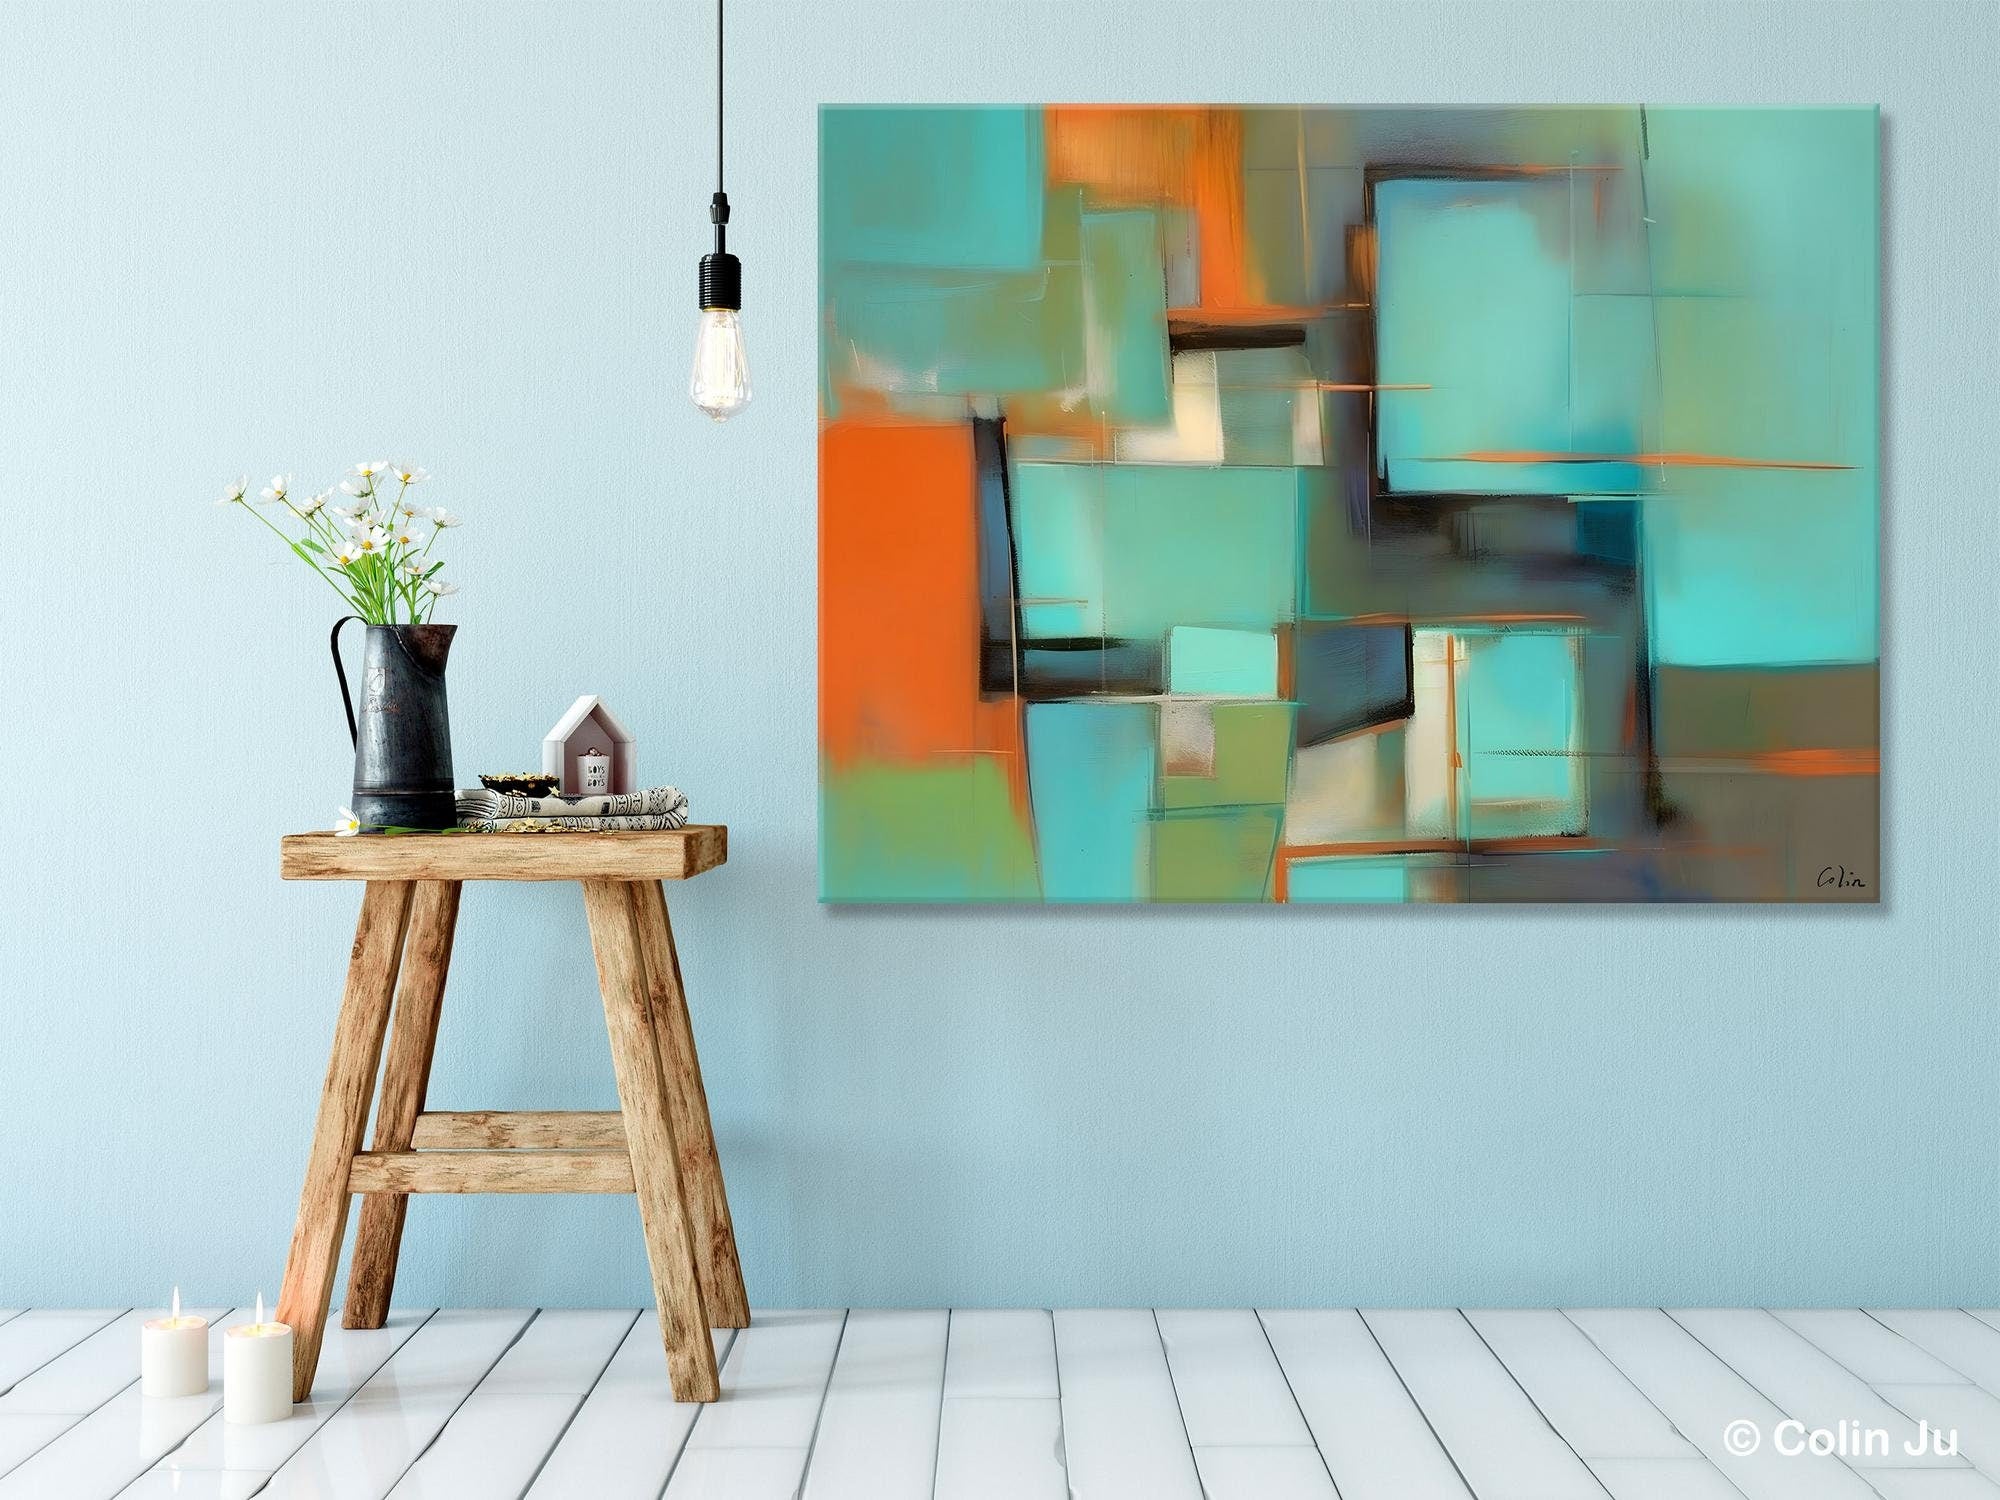 Large Canvas Art Painting for Bedroom, Huge Modern Abstract Paintings, Hand Painted Original Canvas Wall Art, Contemporary Acrylic Paintings-artworkcanvas